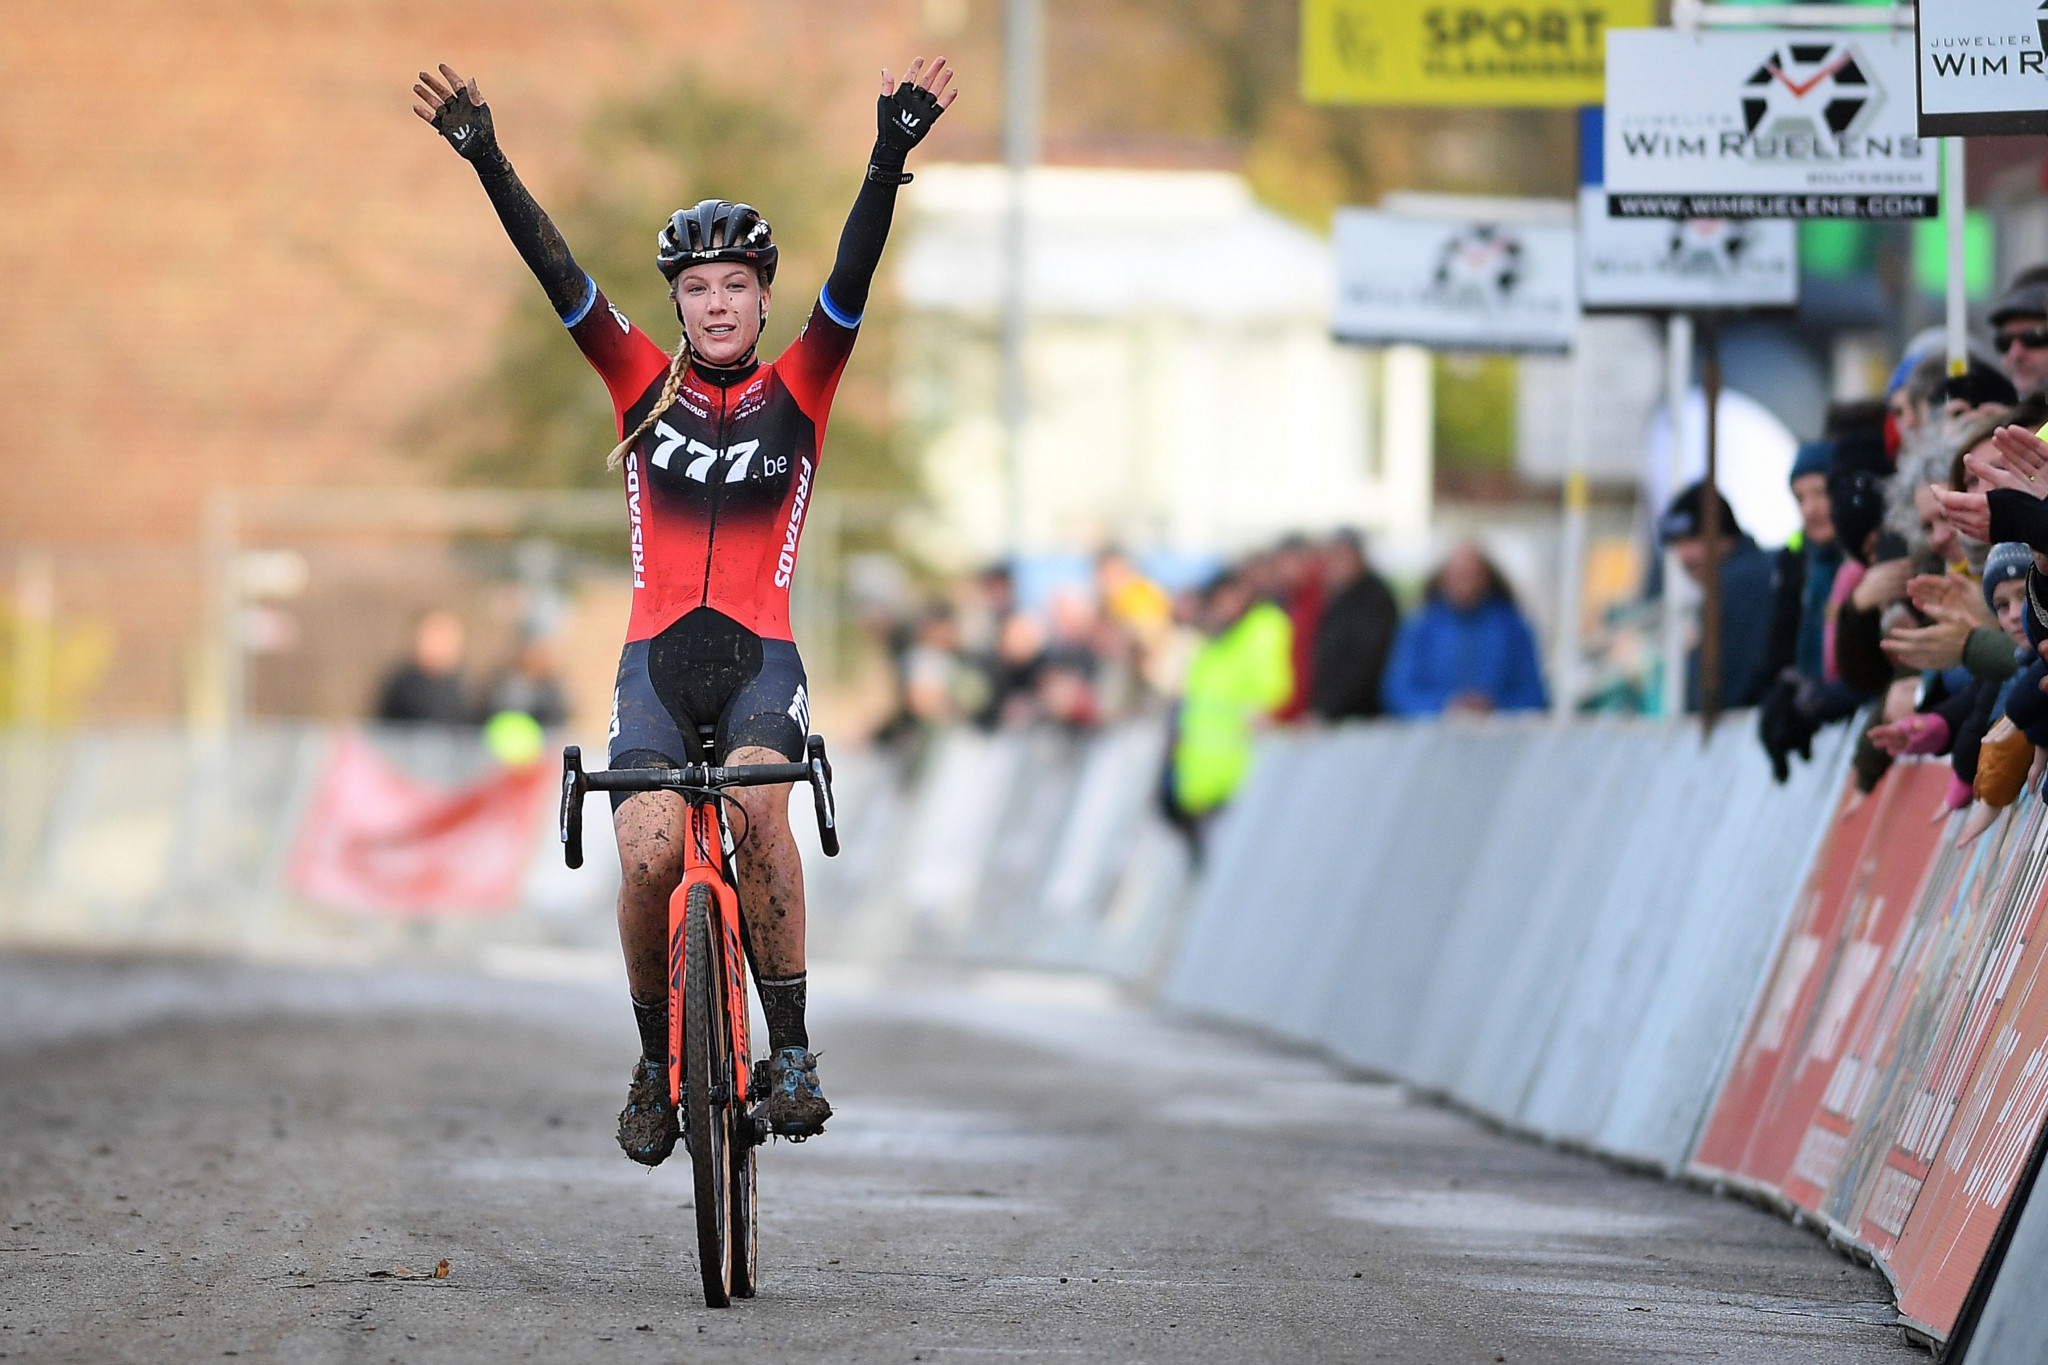 Victory in tomorrow's final leg of the UCI Cyclo-cross World Cup in the Dutch village of Hoogerheide would be enough to earn Annemarie Worst the women's title ©Getty Images